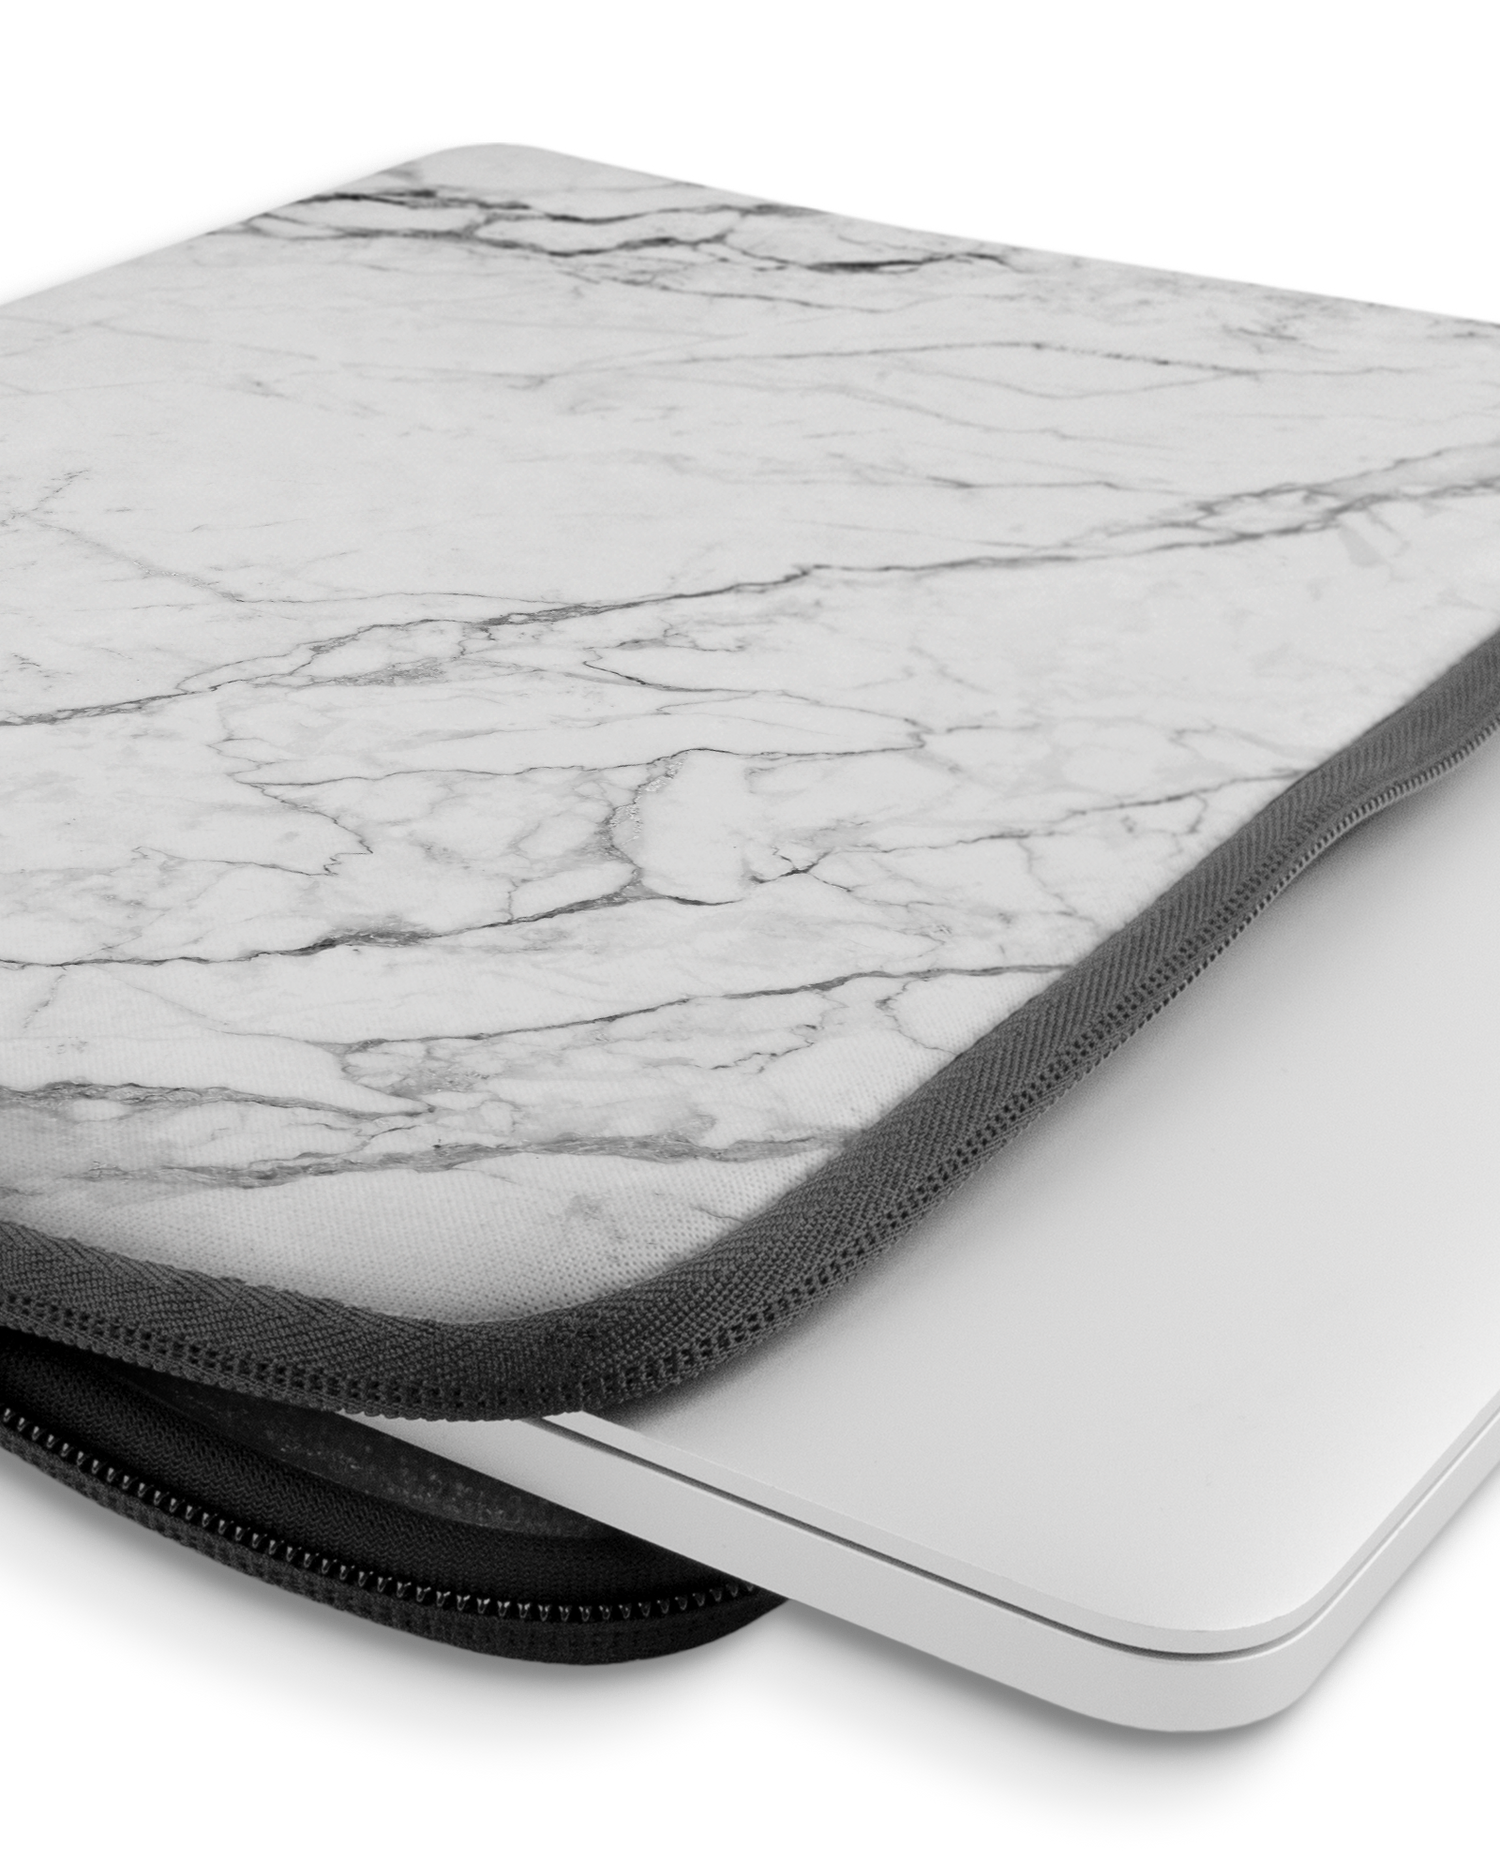 White Marble Laptop Case 14 inch with device inside